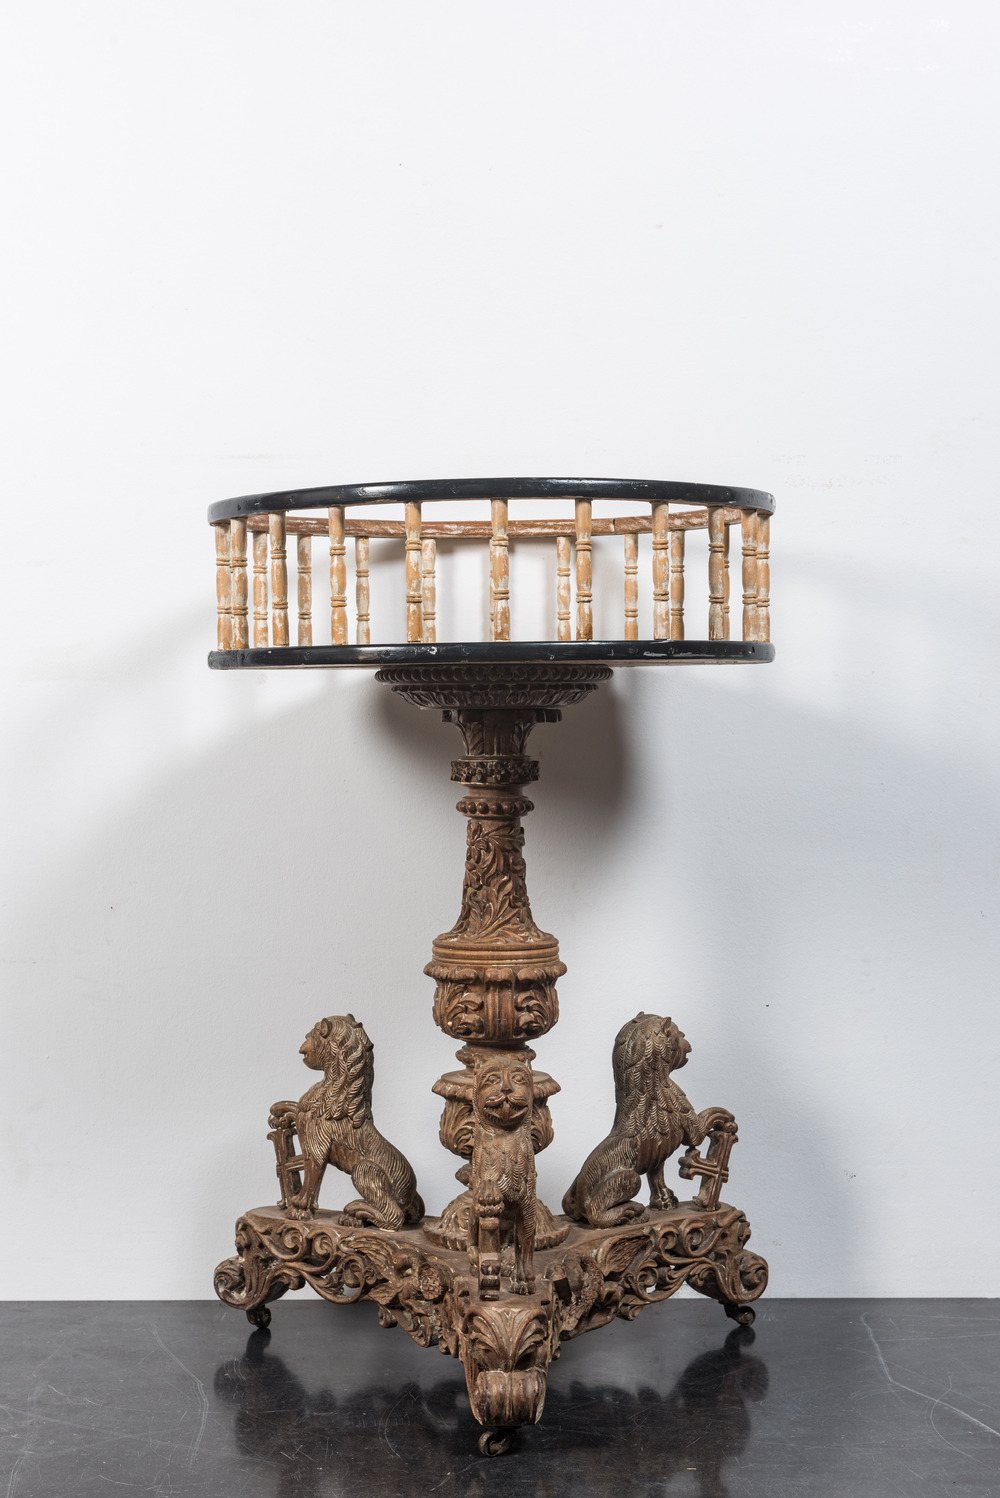 A large patinated wooden tripod jardini&egrave;re, 19th C.